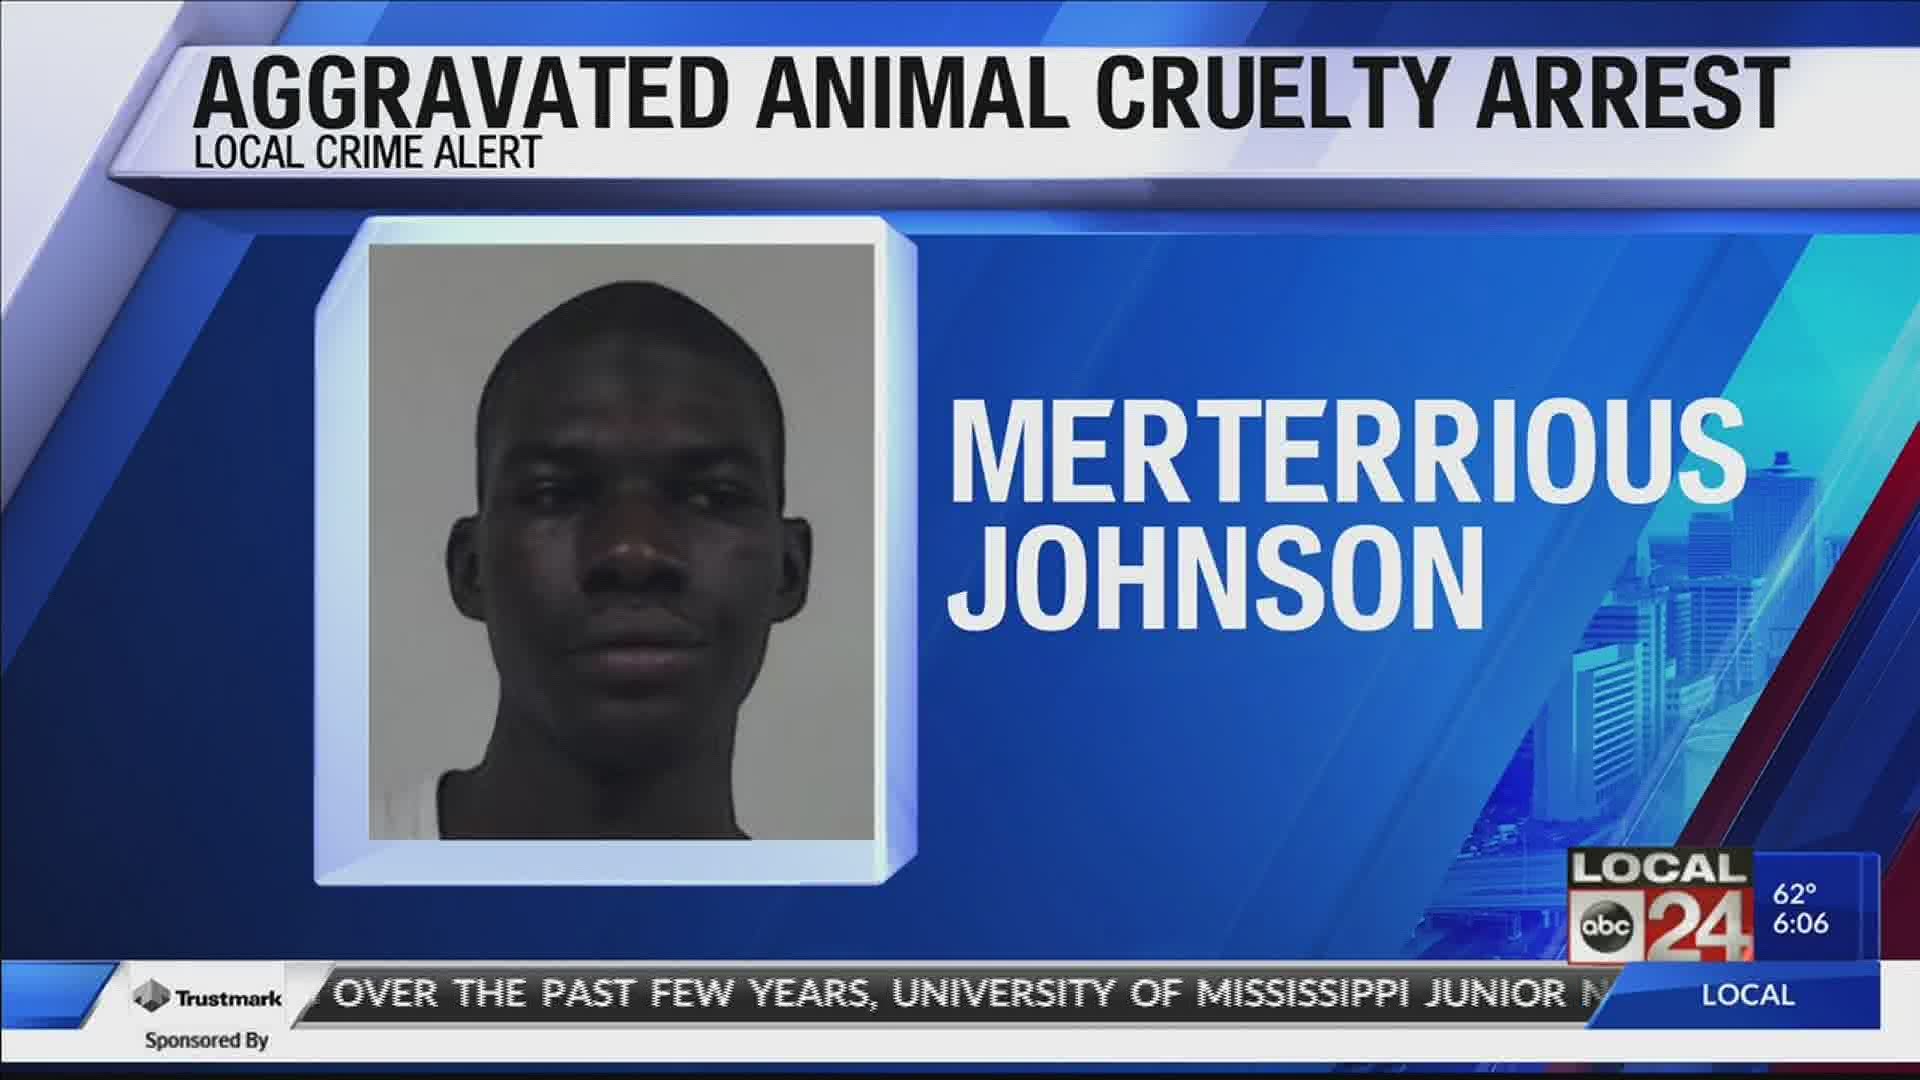 Merterrious Johnson was arrested on charges of aggravated animal cruelty.